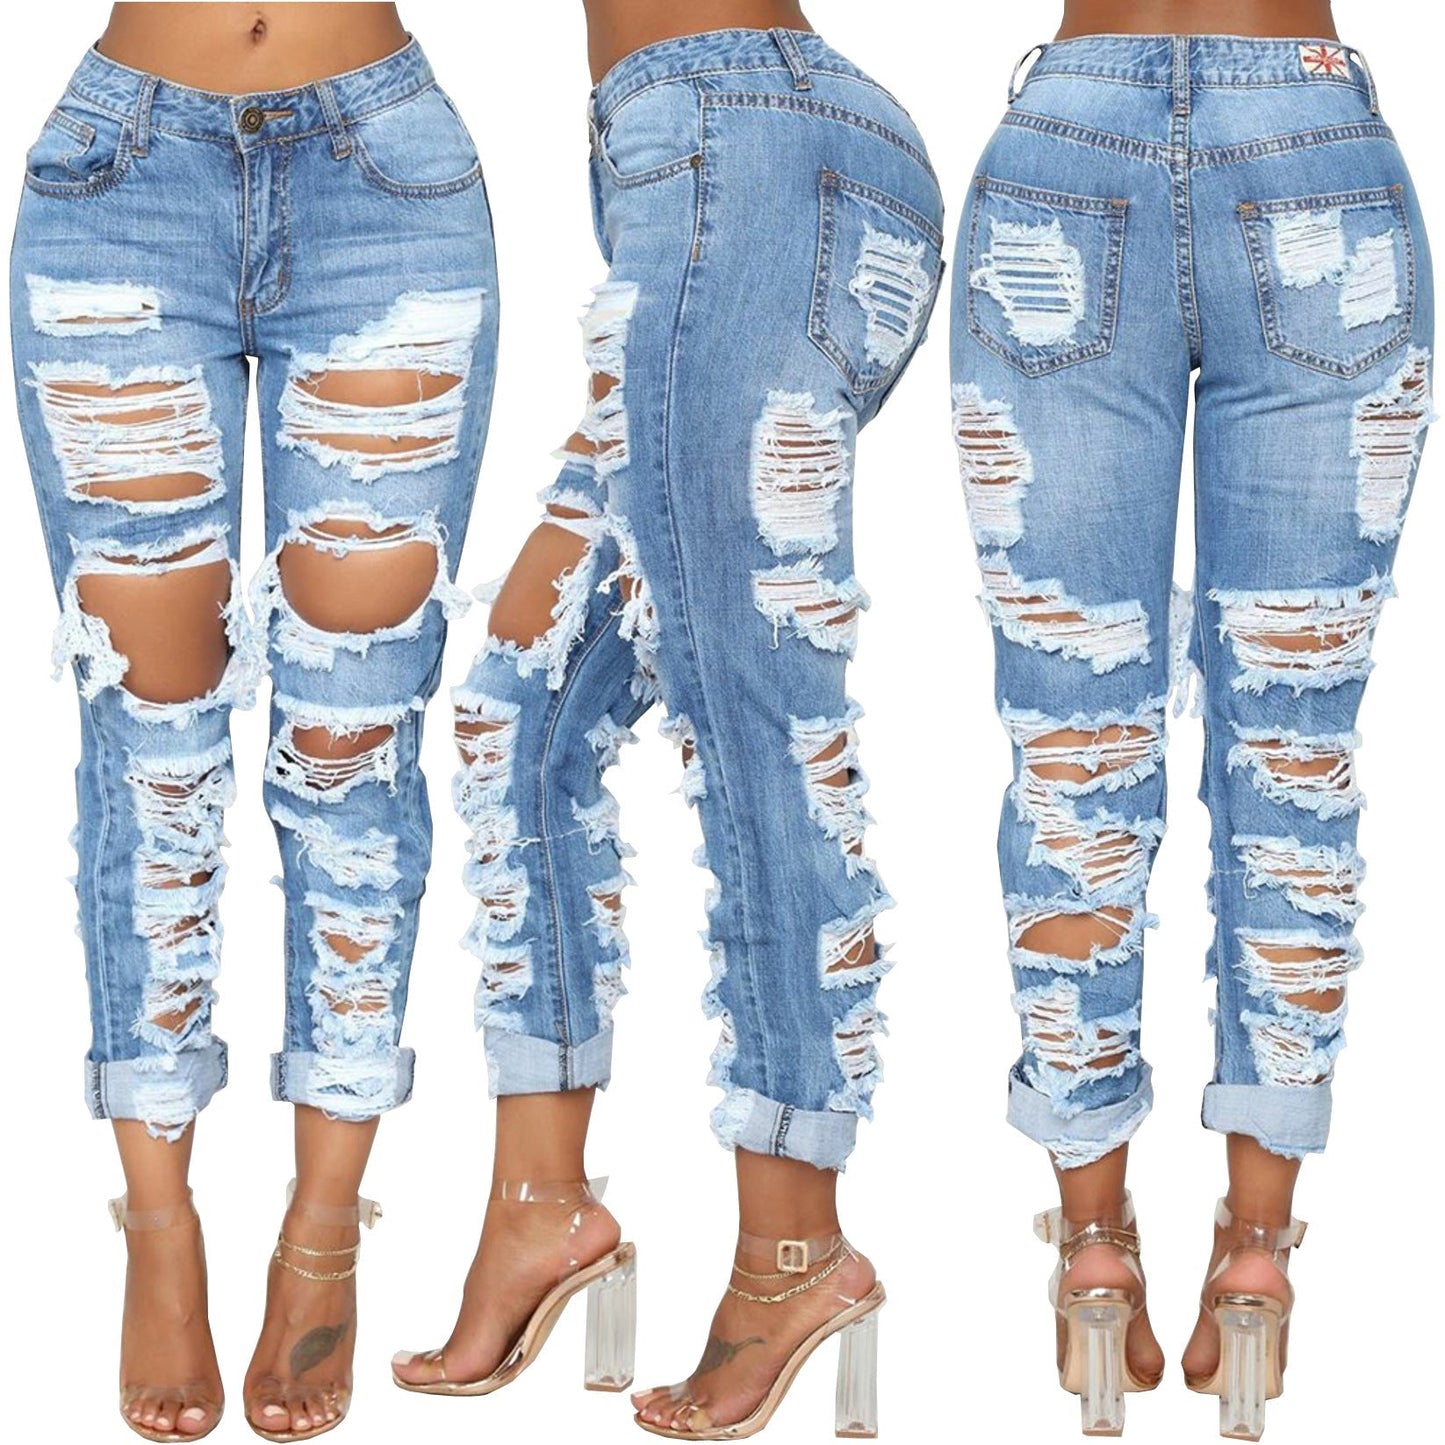 Personalized pierced beggar elastic jeans before and after fashion Blue